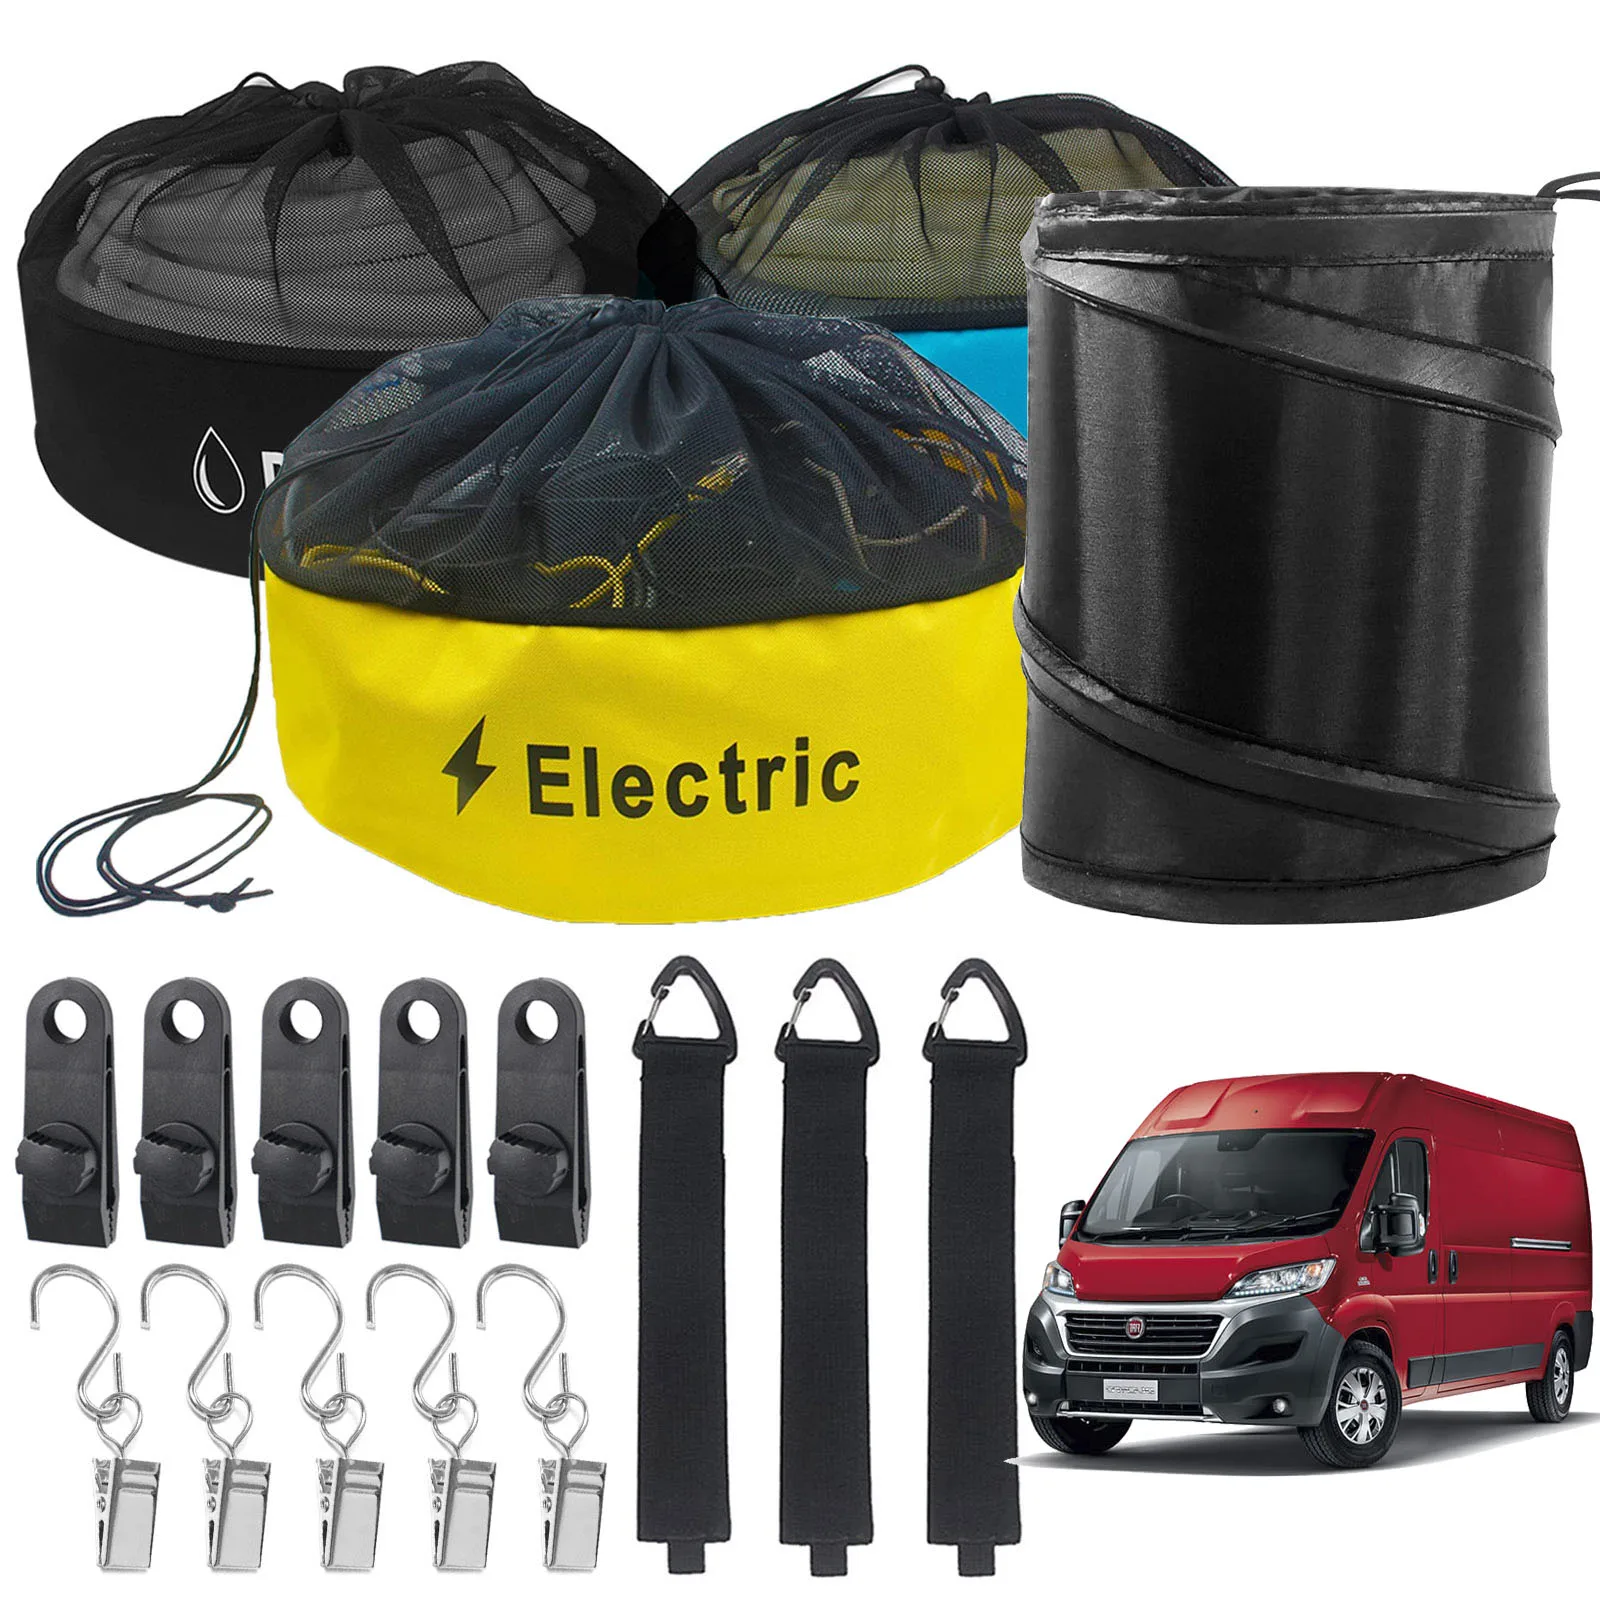 RV Hose Bags for Fiat Ducato 244 250 290 Camper Storage Sewer Fresh/Black Water Electrical Trash Can Motorhome Cleaning Tool Kit 100pcs biodegradable garbage bags classified disposable cleaning kitchen starch degradable trash bags environmental